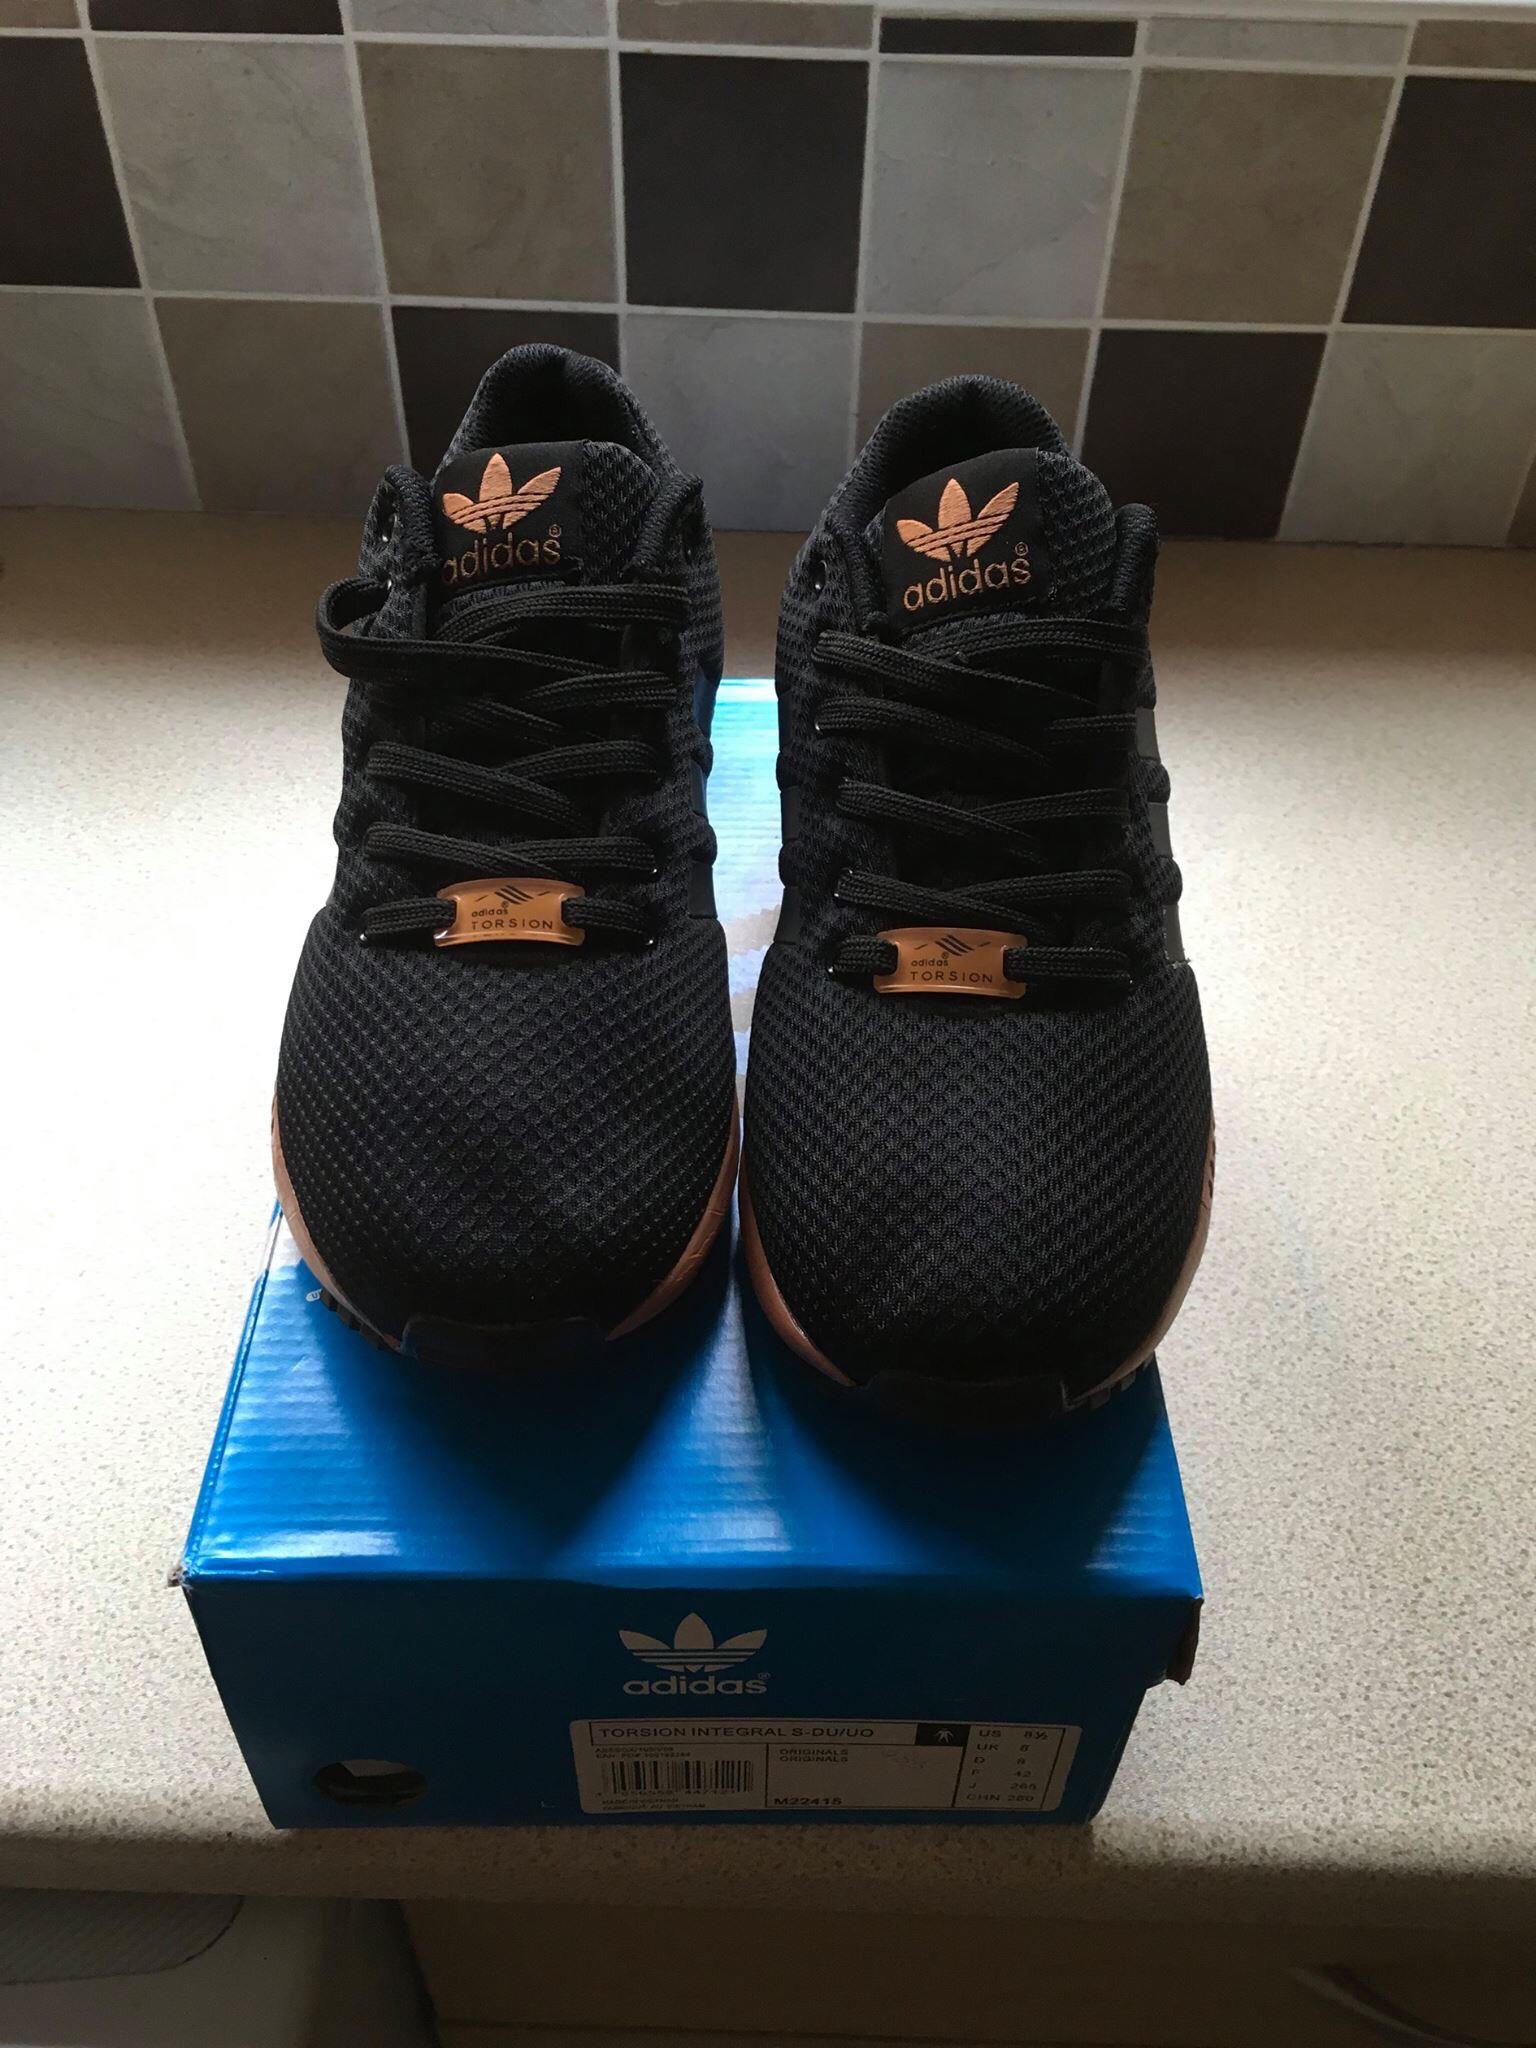 adidas zx flux women's black and rose gold